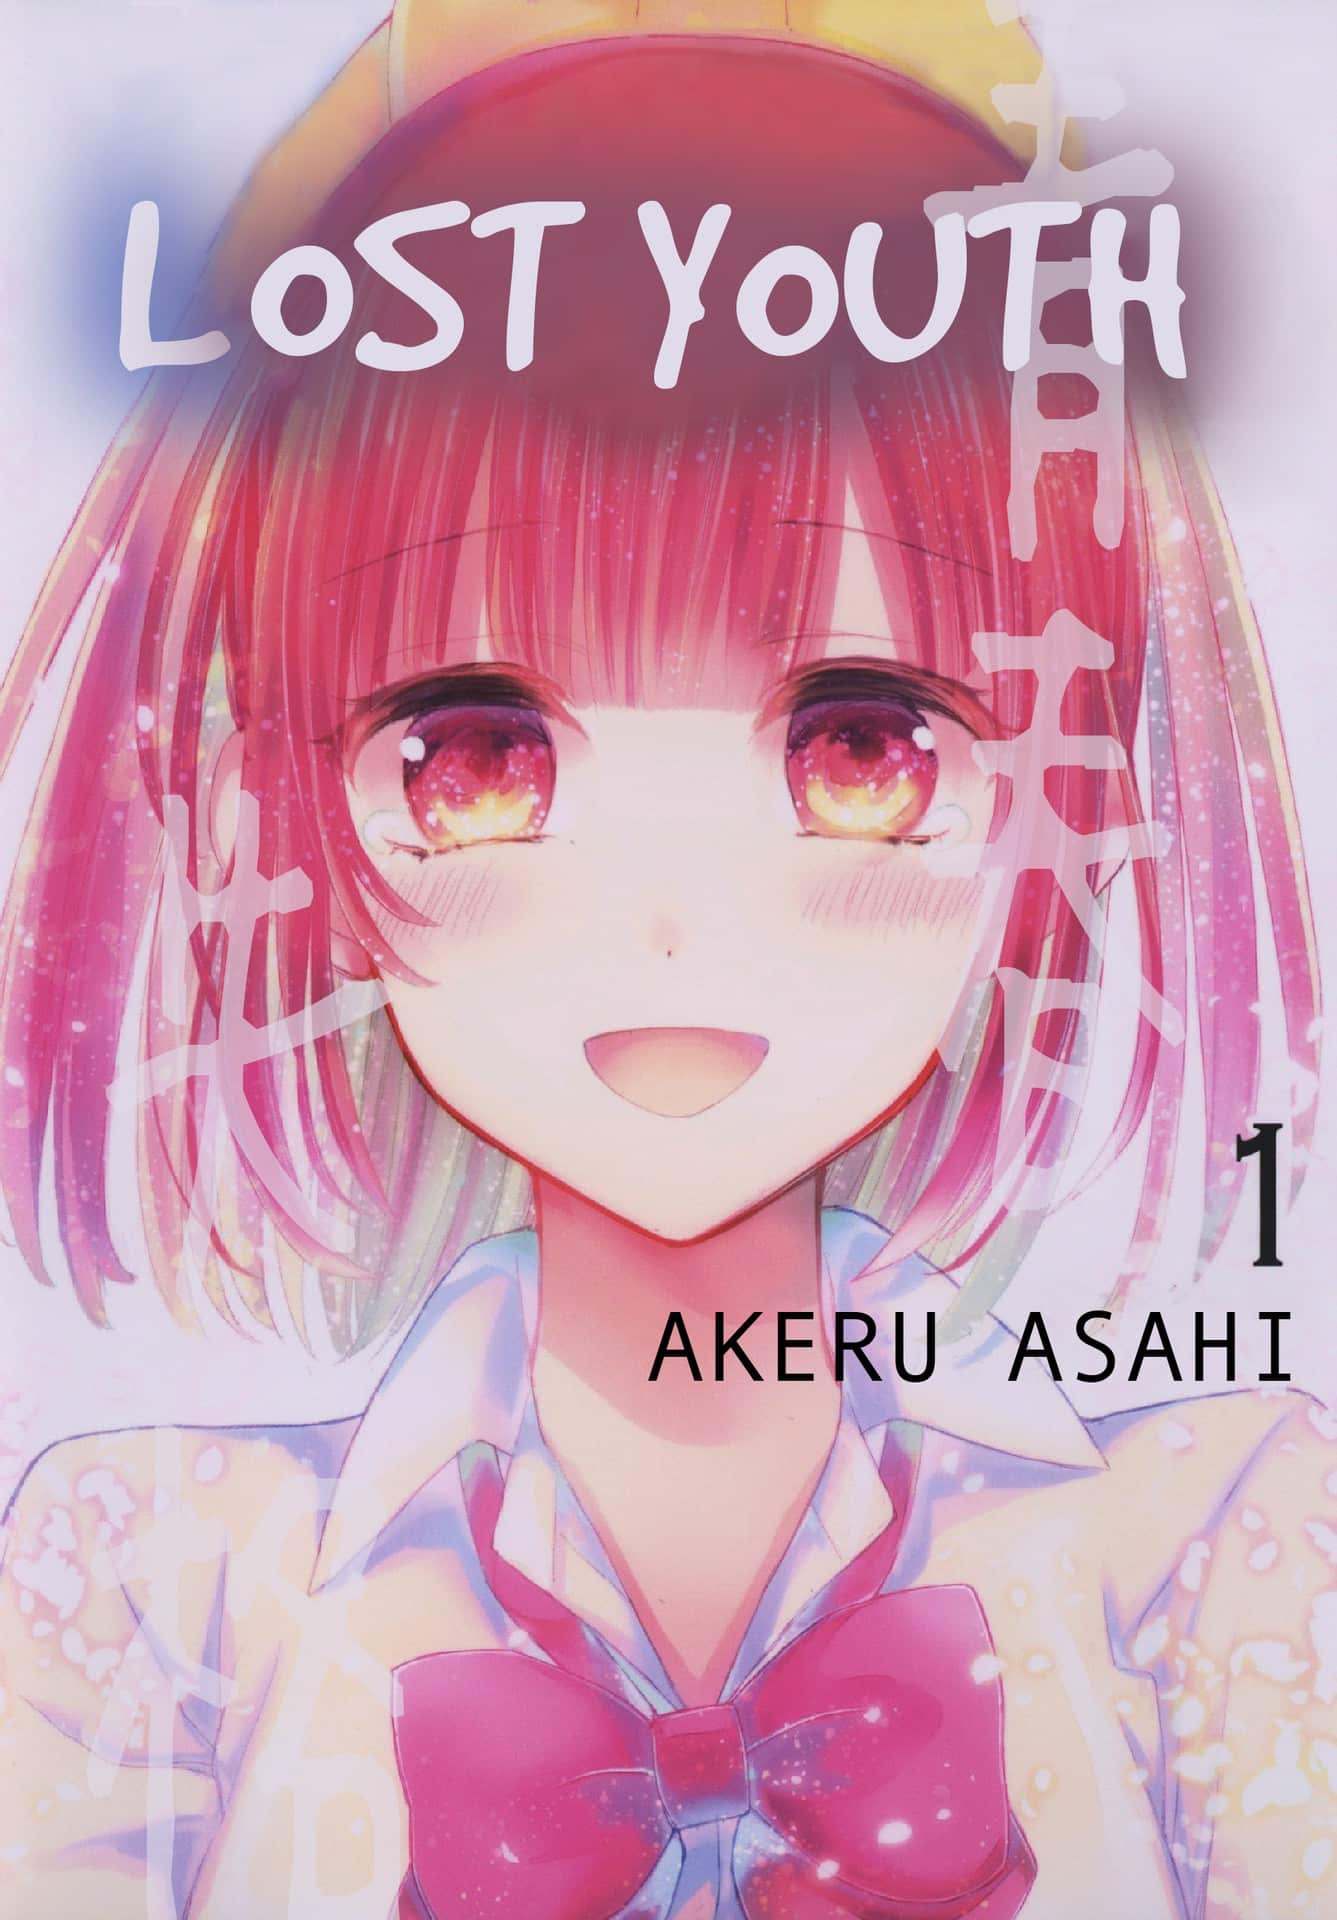 Lost Youth Vol 1 cover